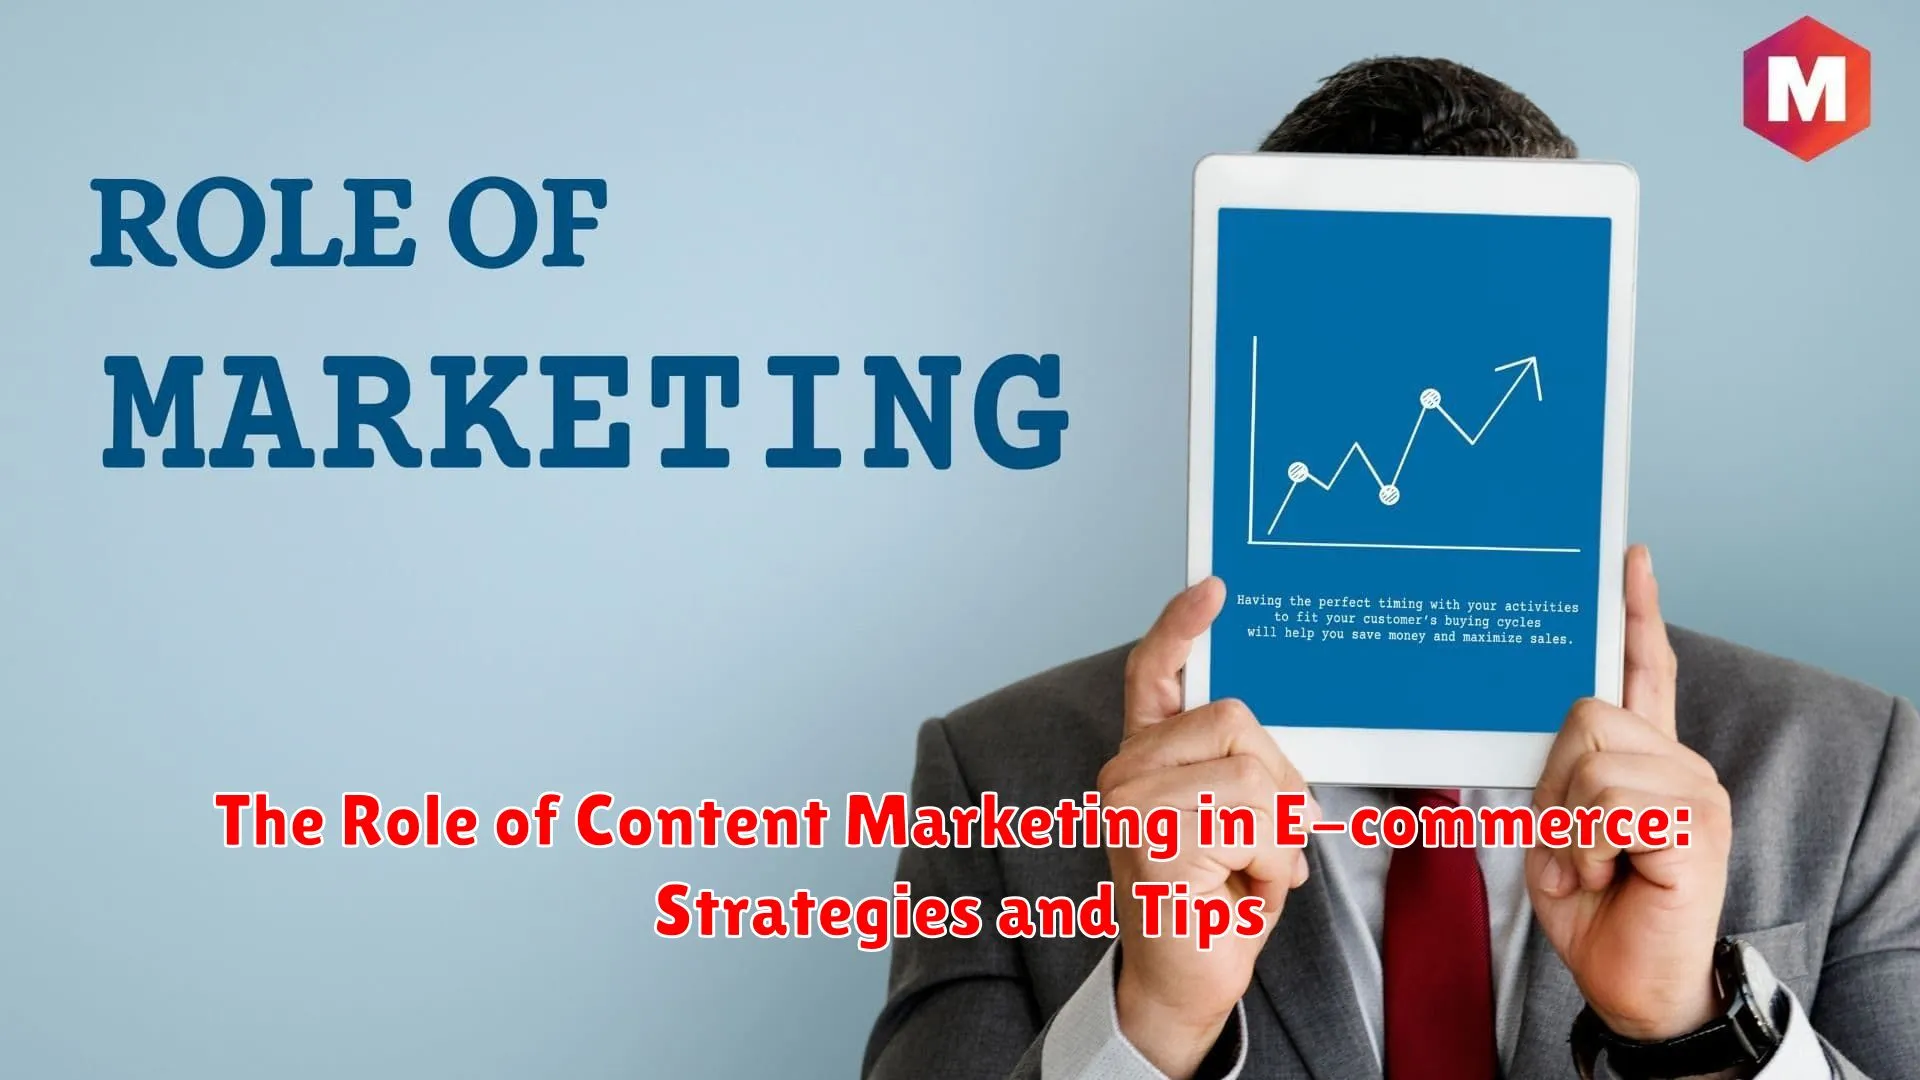 The Role of Content Marketing in E-commerce: Strategies and Tips